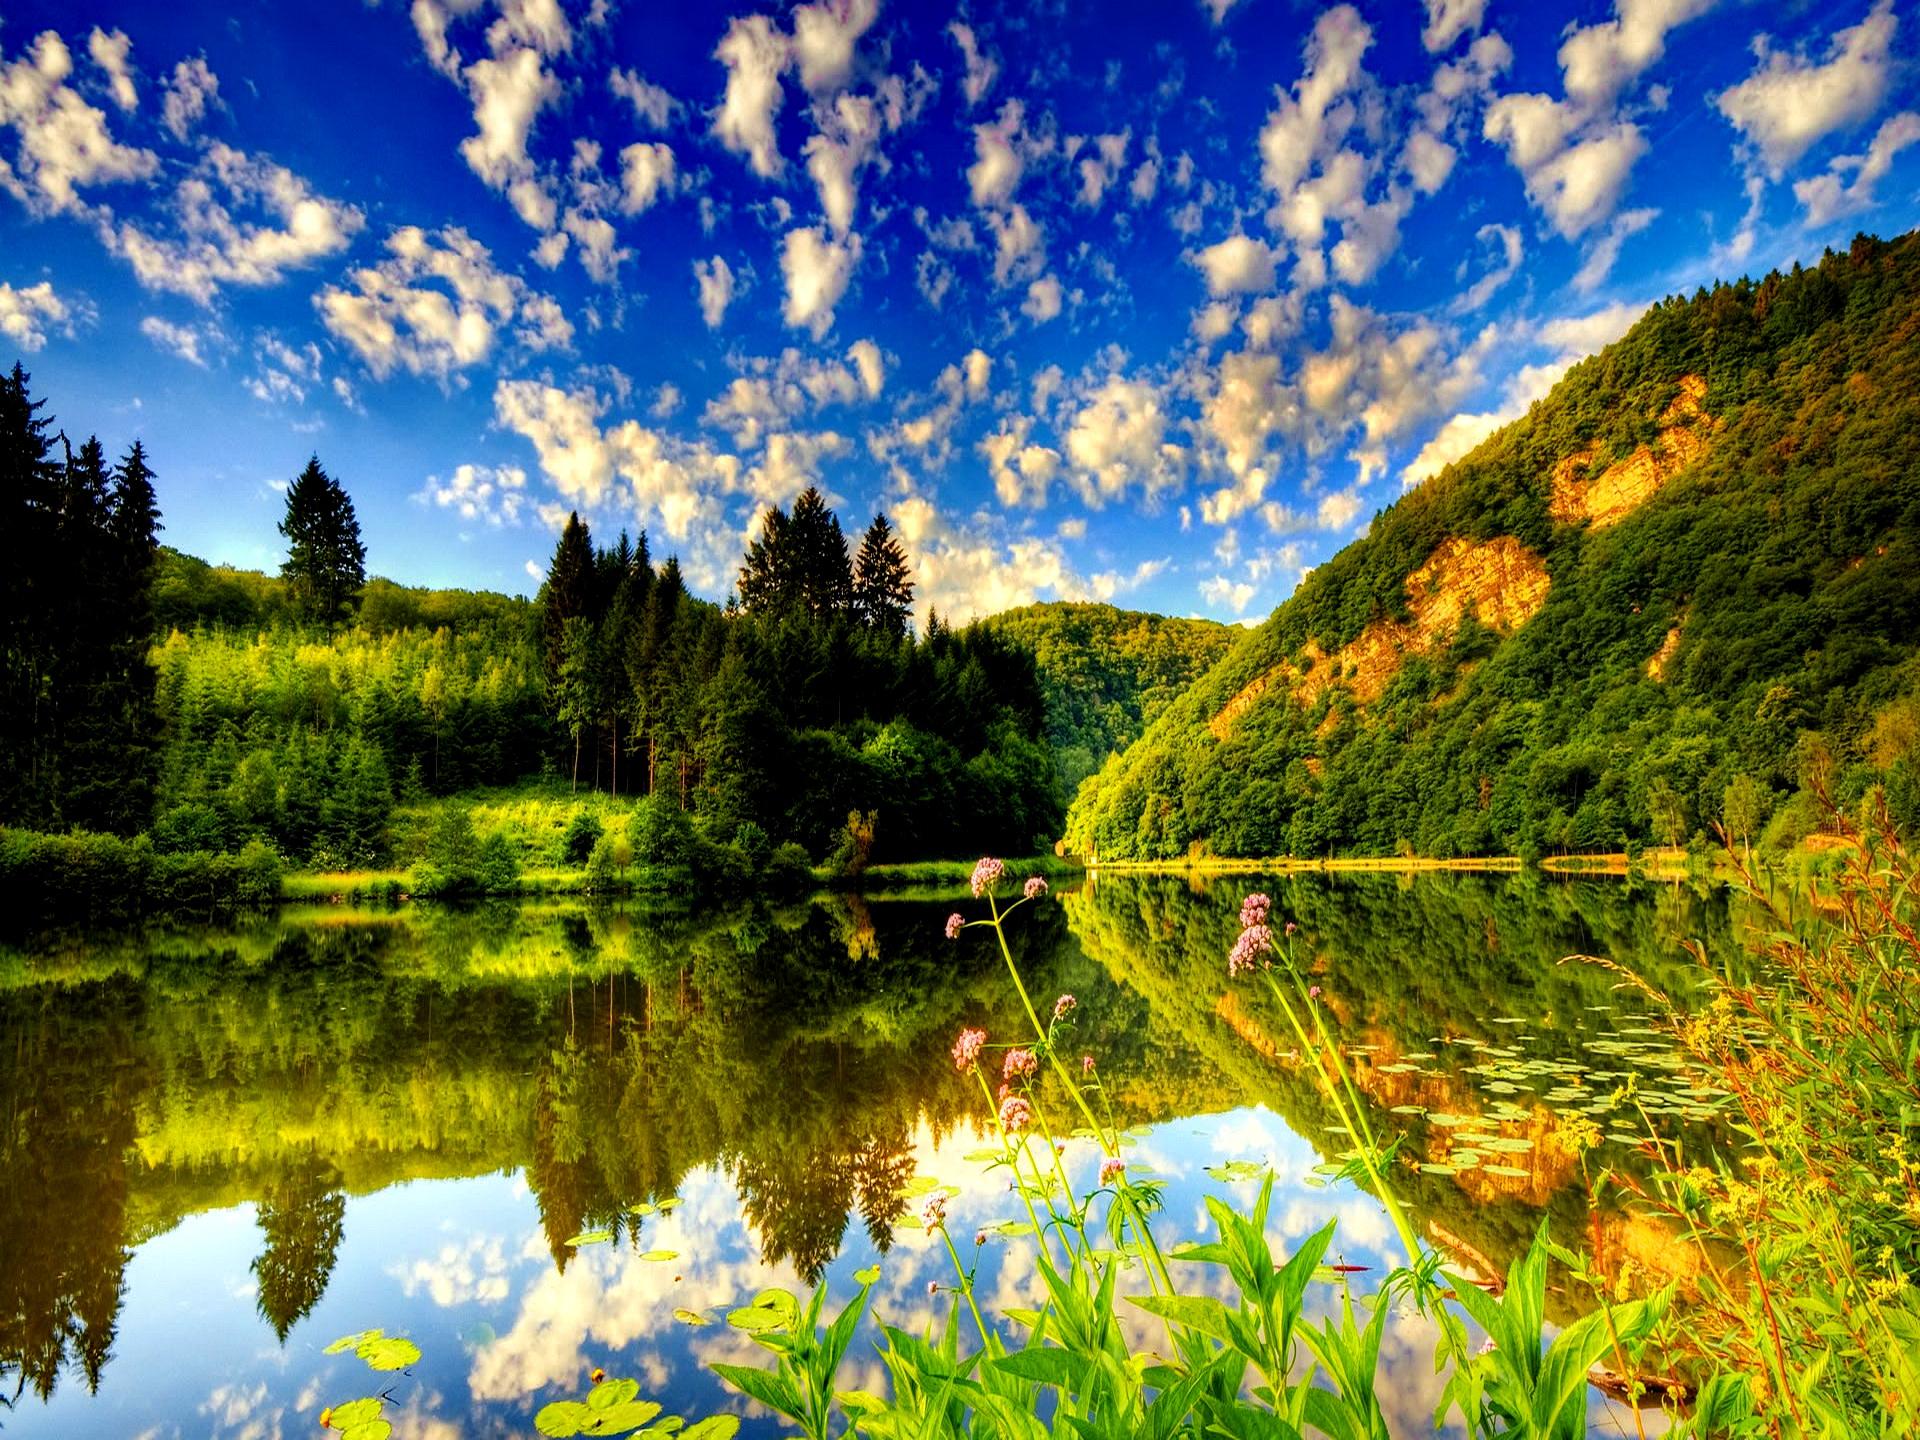 Lake summer nature wallpaper With Resolutions 19201440 Pixel 1920x1440